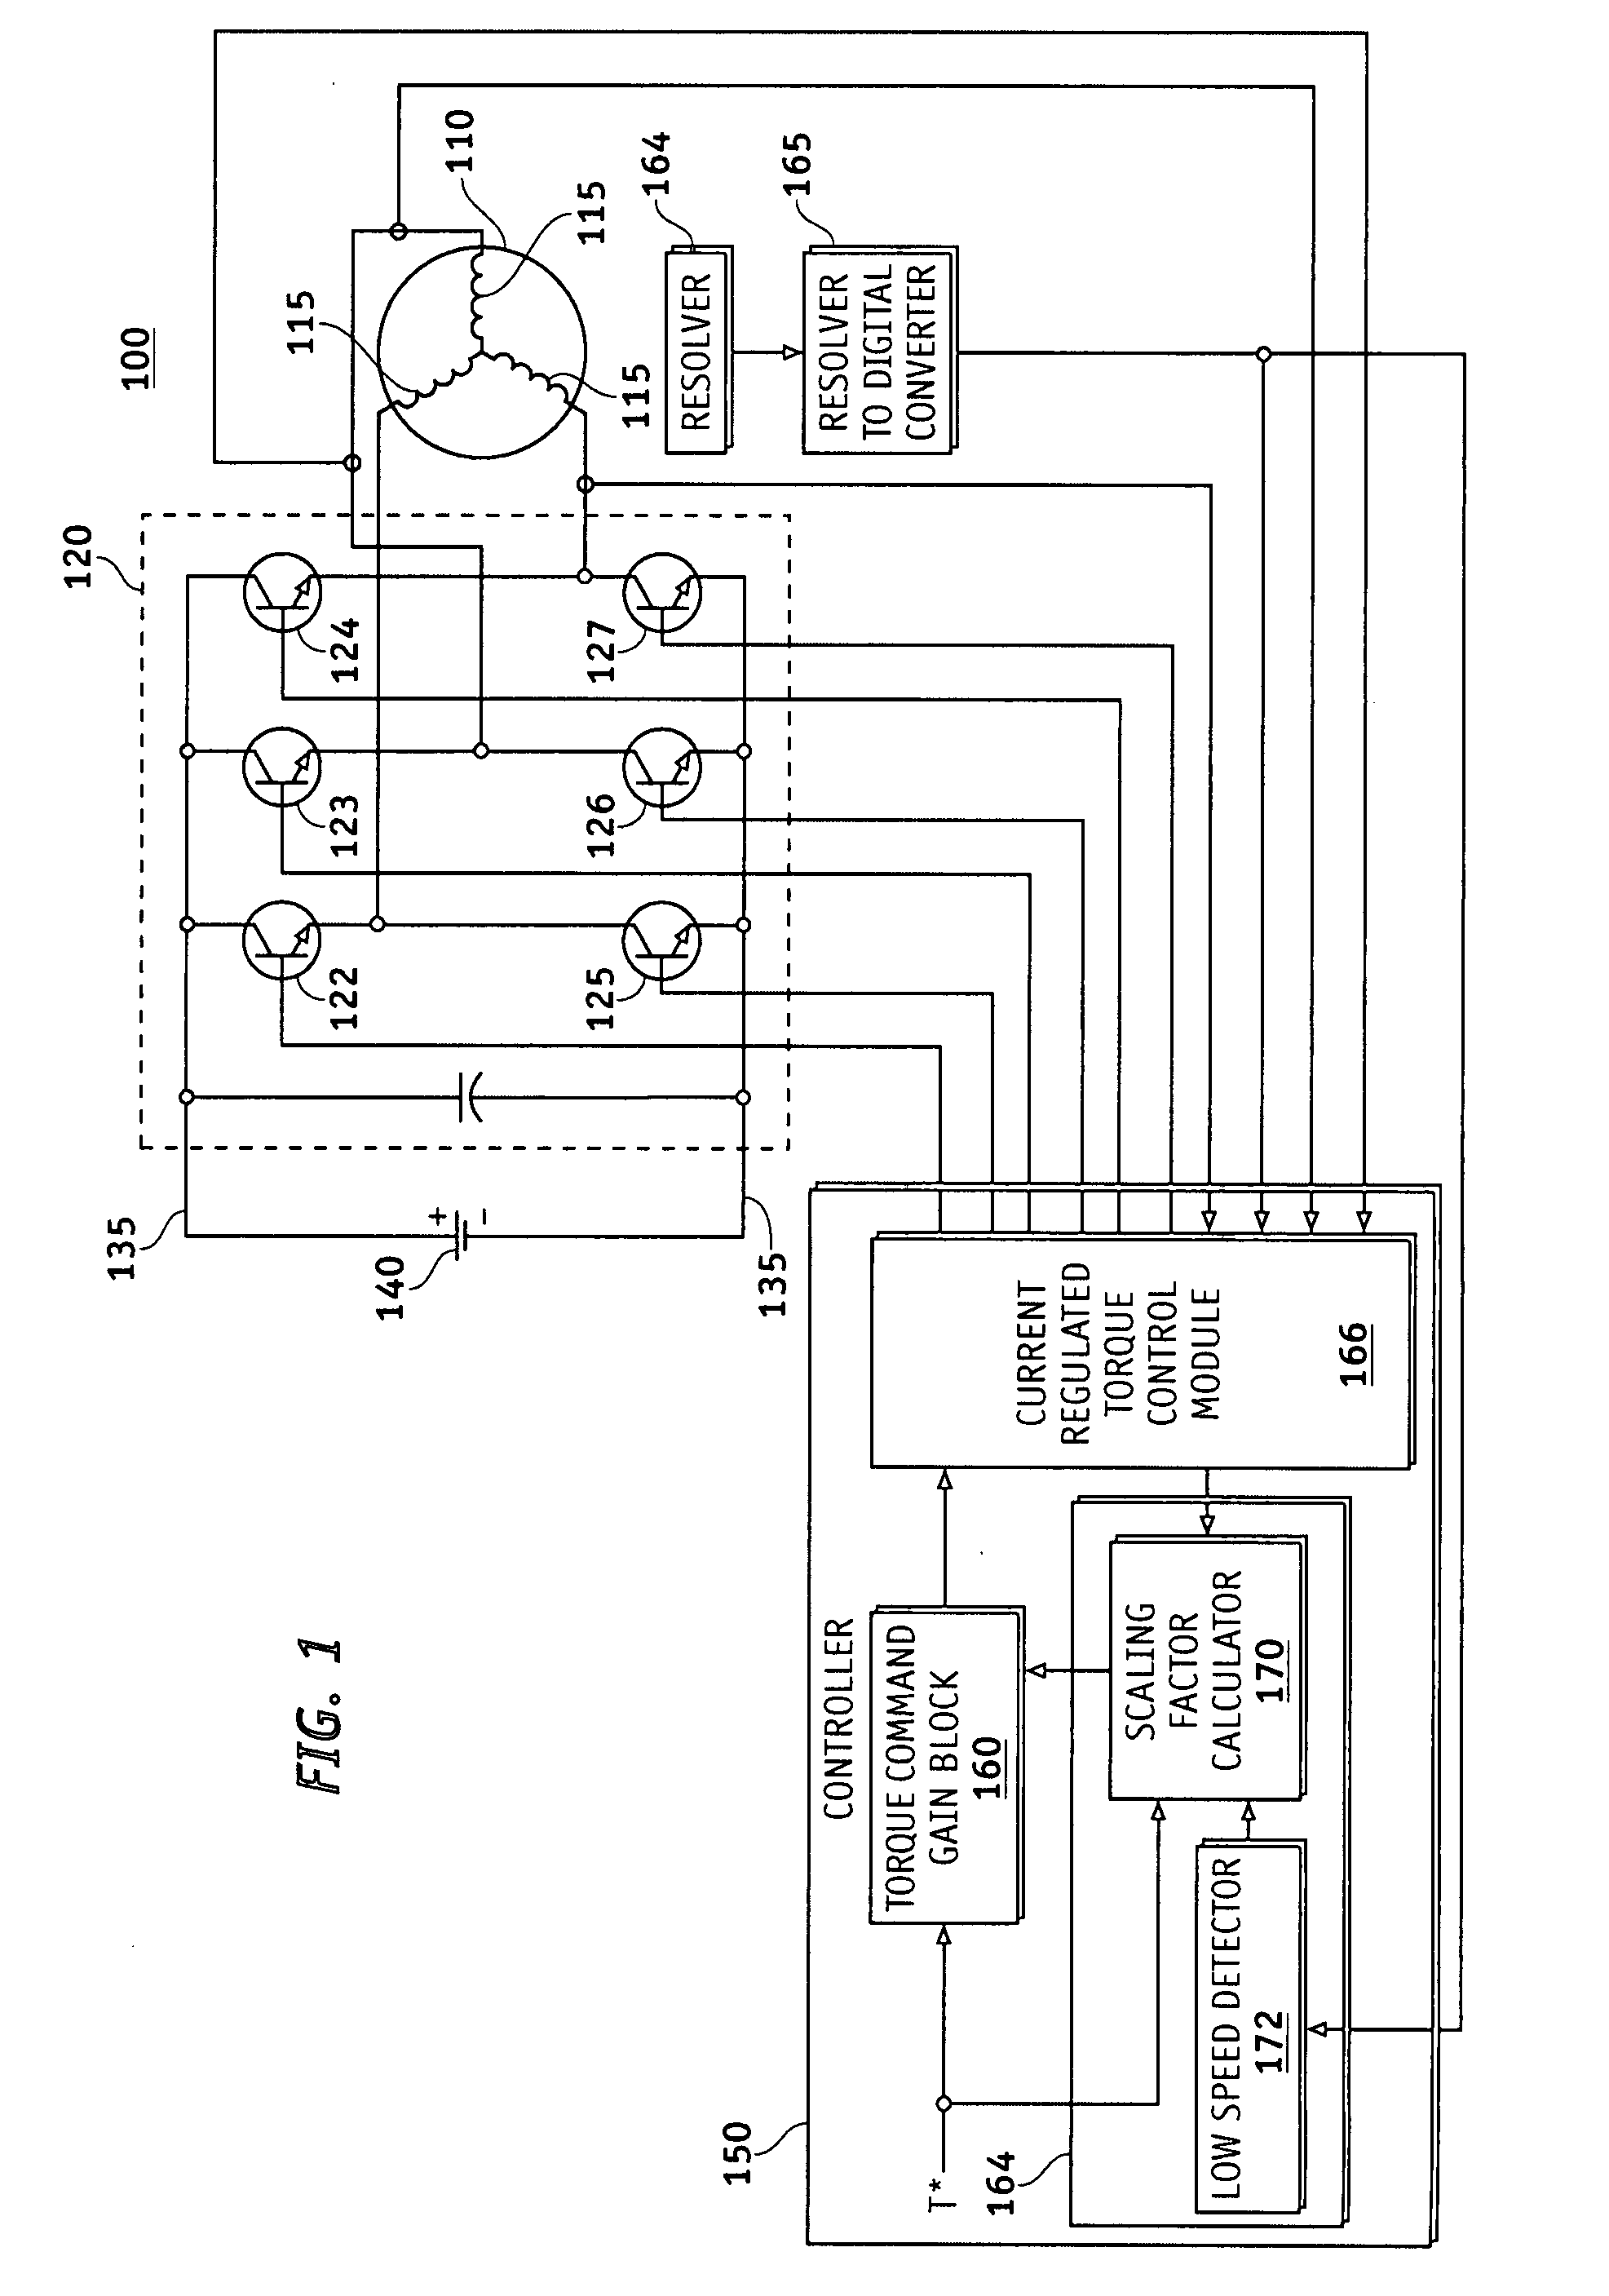 Low speed synchronous motor drive operation